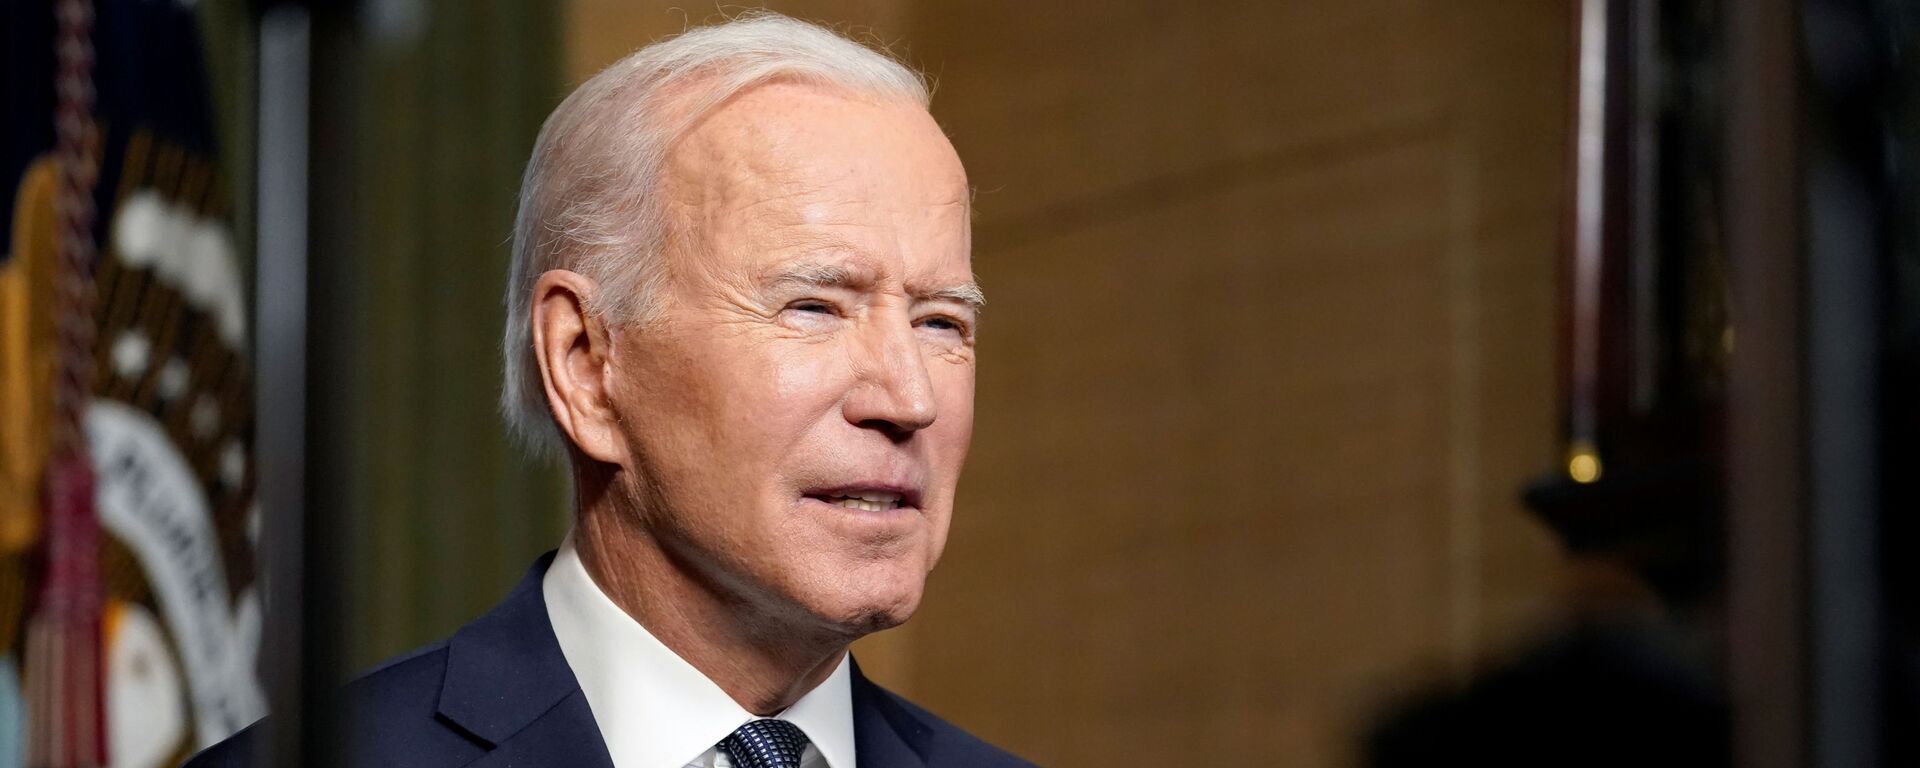 U.S. President Joe Biden leaves delivers remarks on his plan to withdraw American troops from Afghanistan, at the White House, Washington, U.S., April 14, 2021. - Sputnik Việt Nam, 1920, 15.04.2021